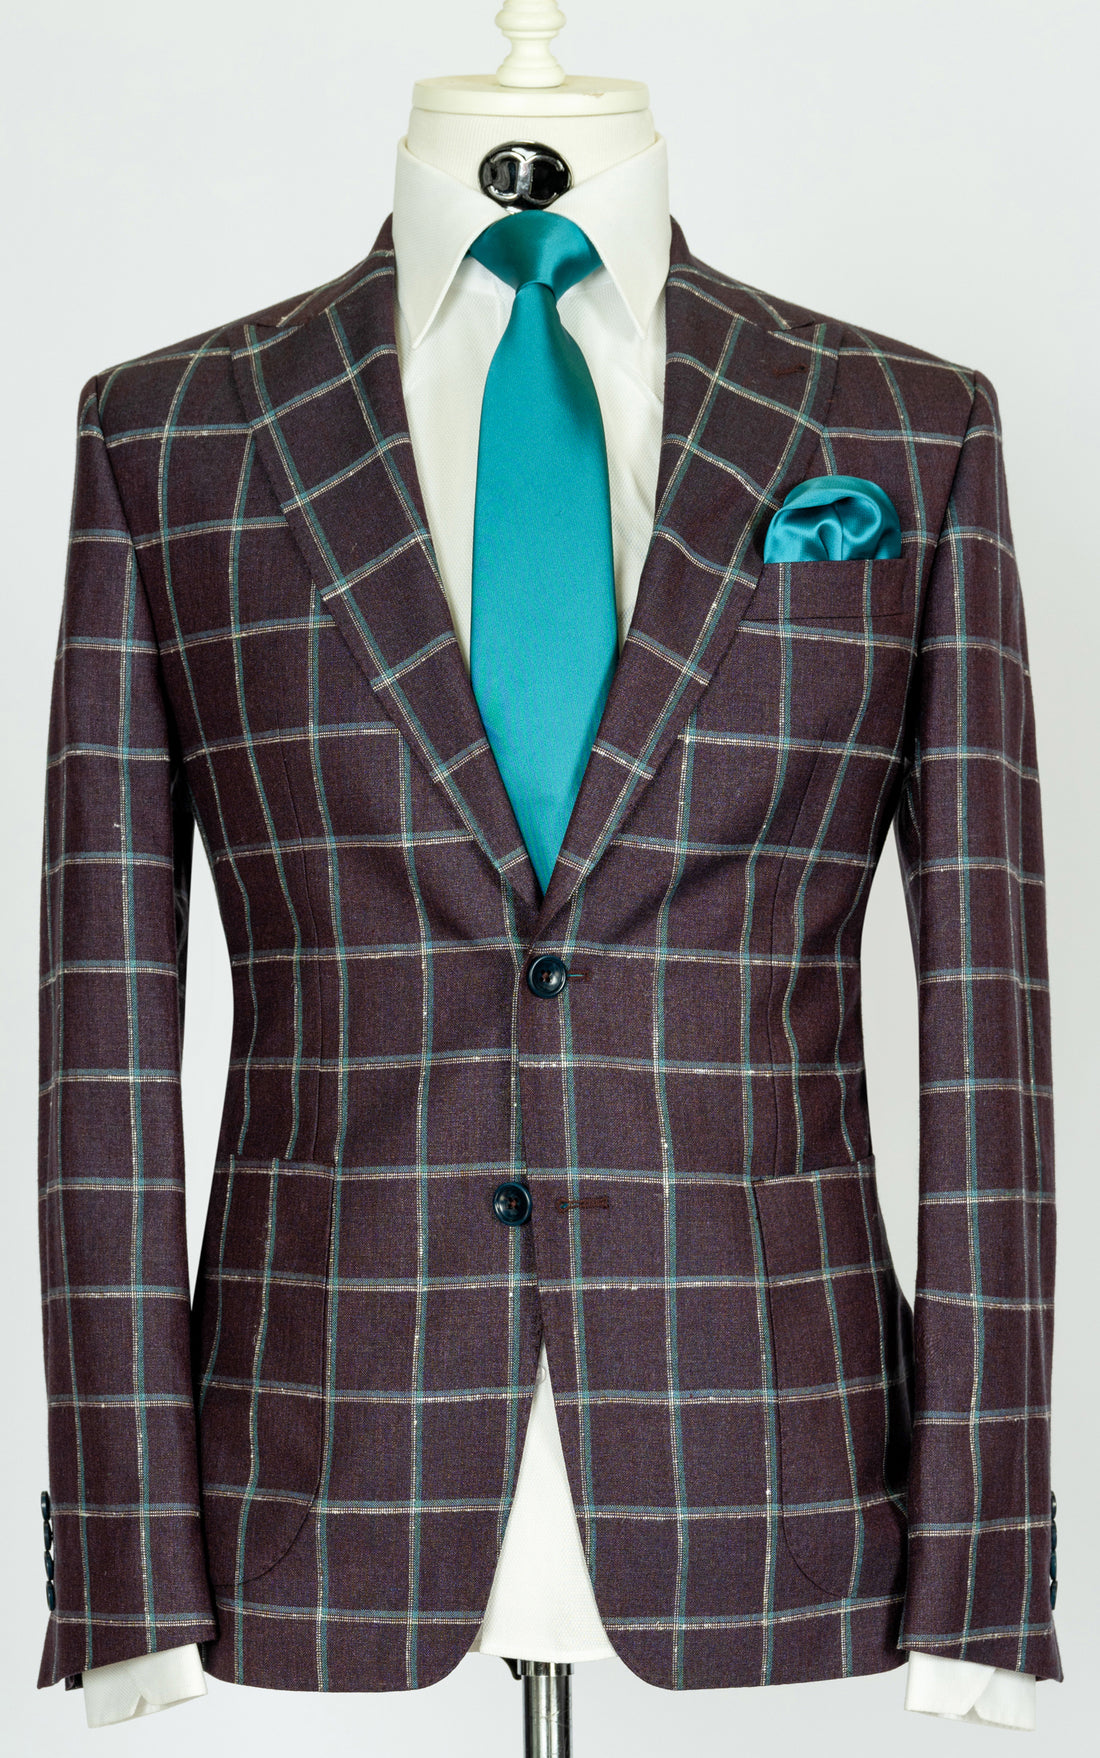 Vitale Barberis - Plum purple with turquoise and grey windowpane 2-piece slim fit suit with patch pockets